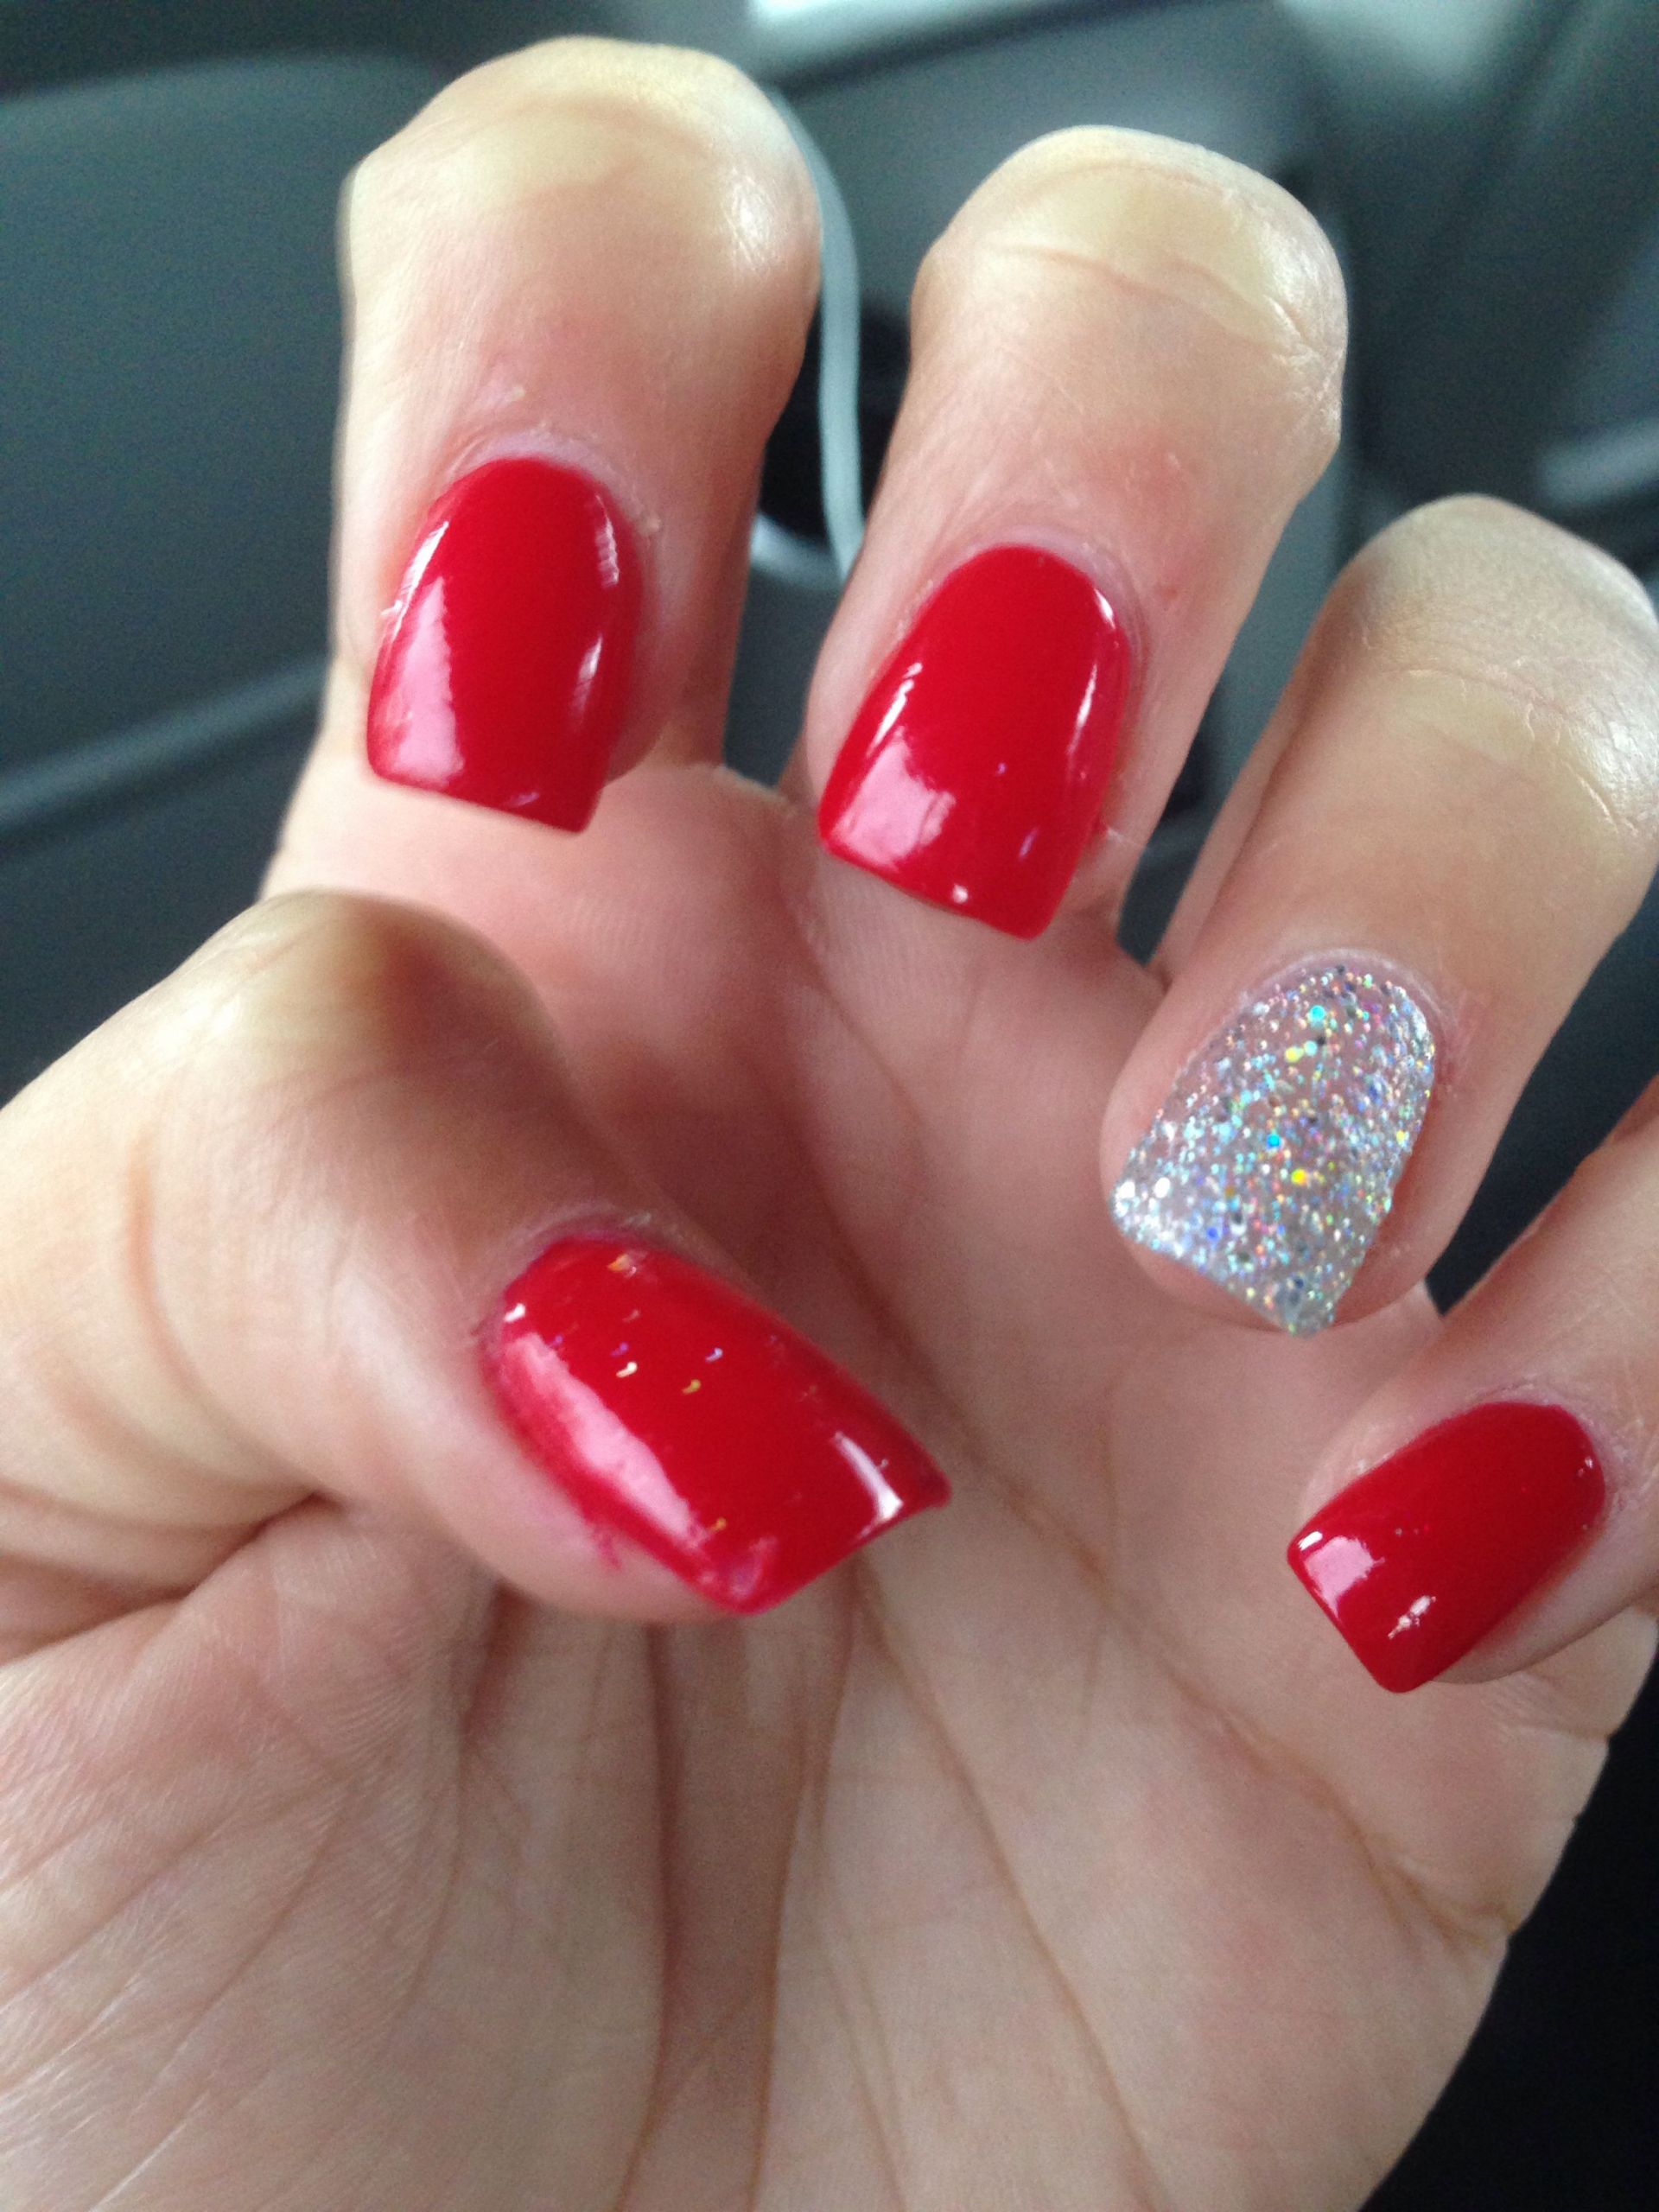 Red Glitter Tip Nails
 Acrylics Red with glitter nail on ring finger